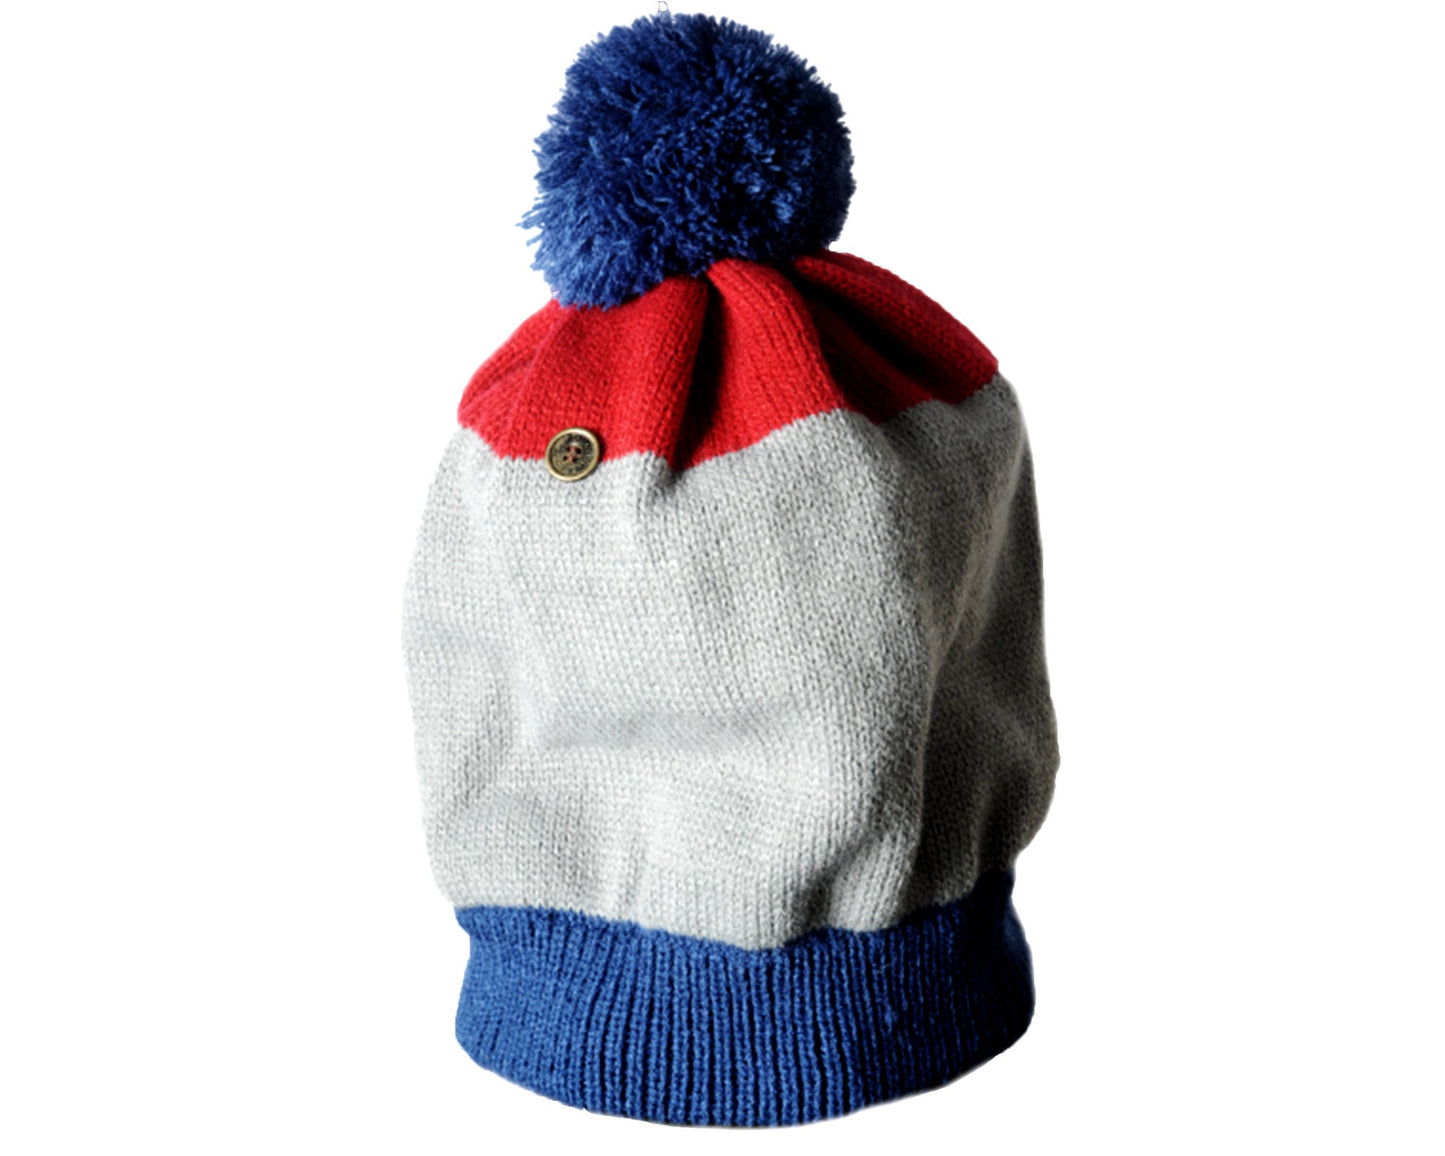 The Cherry Top Beanie - Red